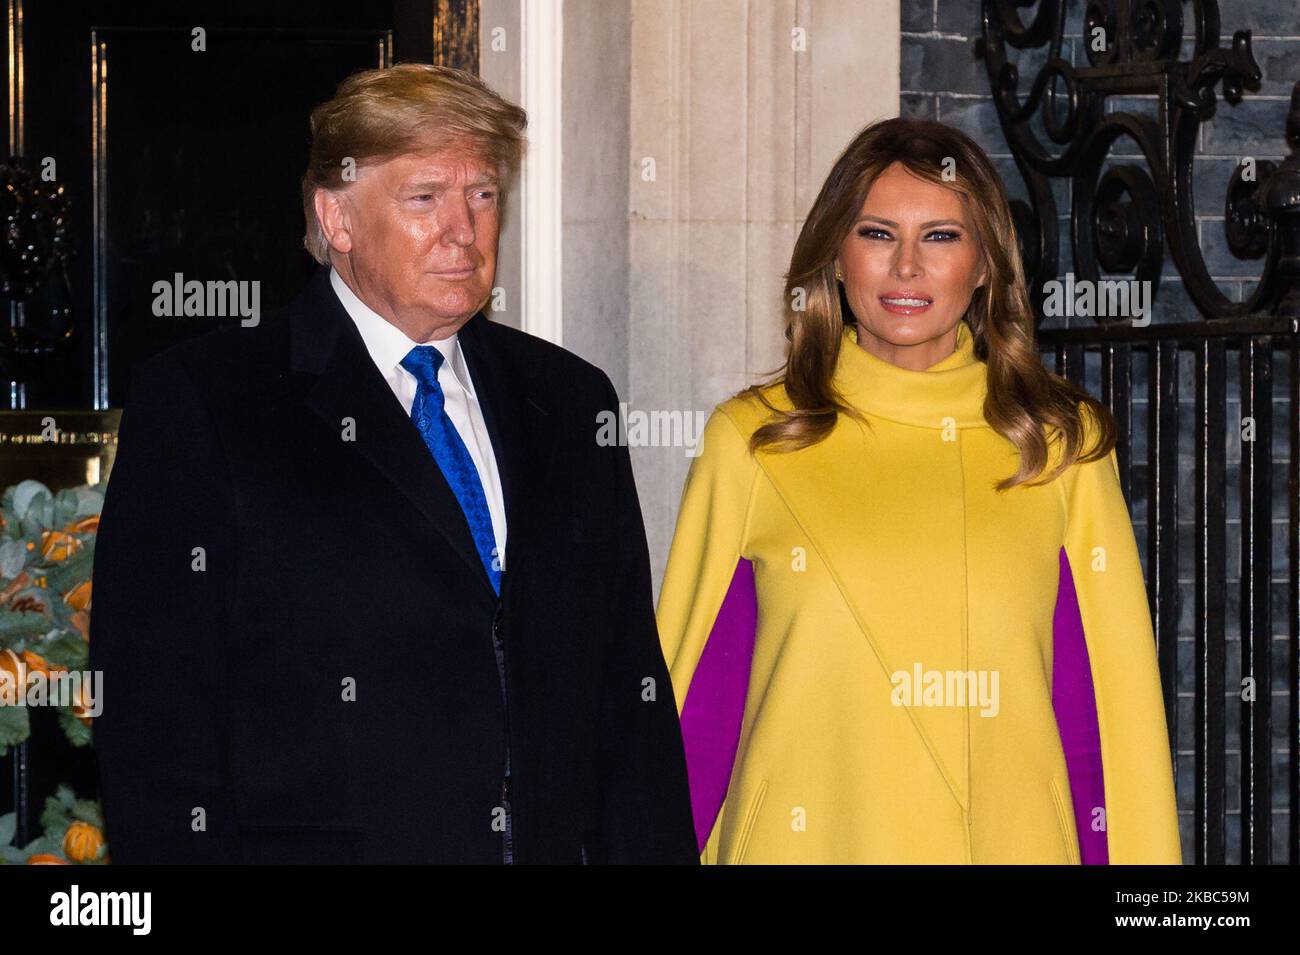 US President Donald Trump and First Lady Melania Trump arrive at 10 Downing Street to attend a reception for NATO leaders hosted by British Prime Minister Boris Johnson on 03 December, 2019 in London, England, ahead of the main summit tomorrow held to commemorate the 70th anniversary of NATO. (Photo by WIktor Szymanowicz/NurPhoto) Stock Photo